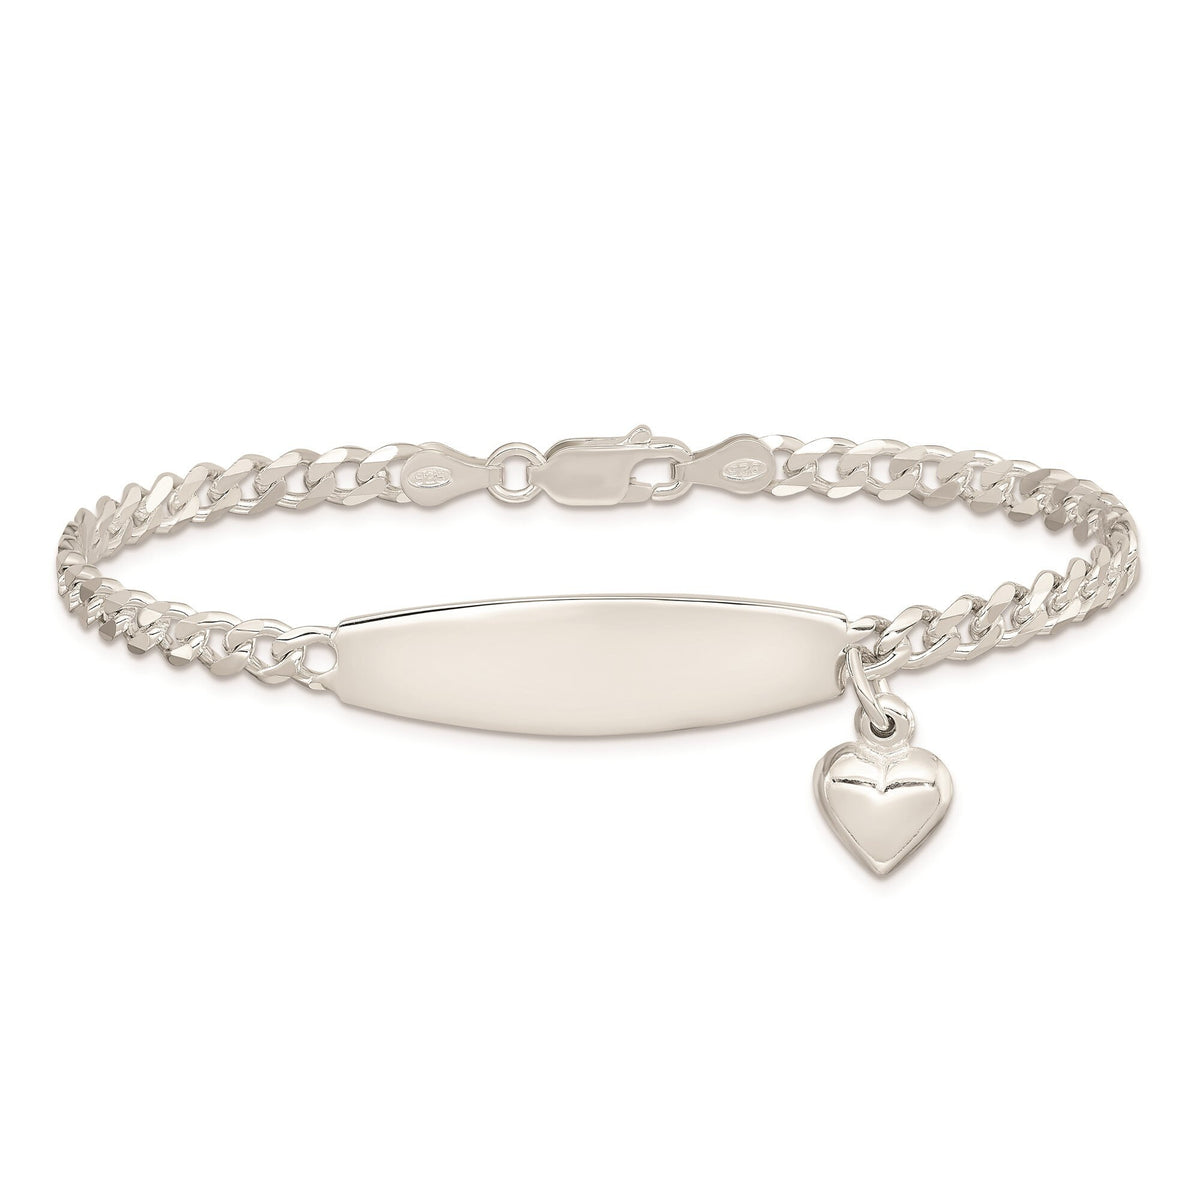 Women's Solid Sterling Silver Personalized ID Cuban Bracelet w/Heart Dangle 7.5 inches Front & Back Engraving -Made in USA Gift Box Included